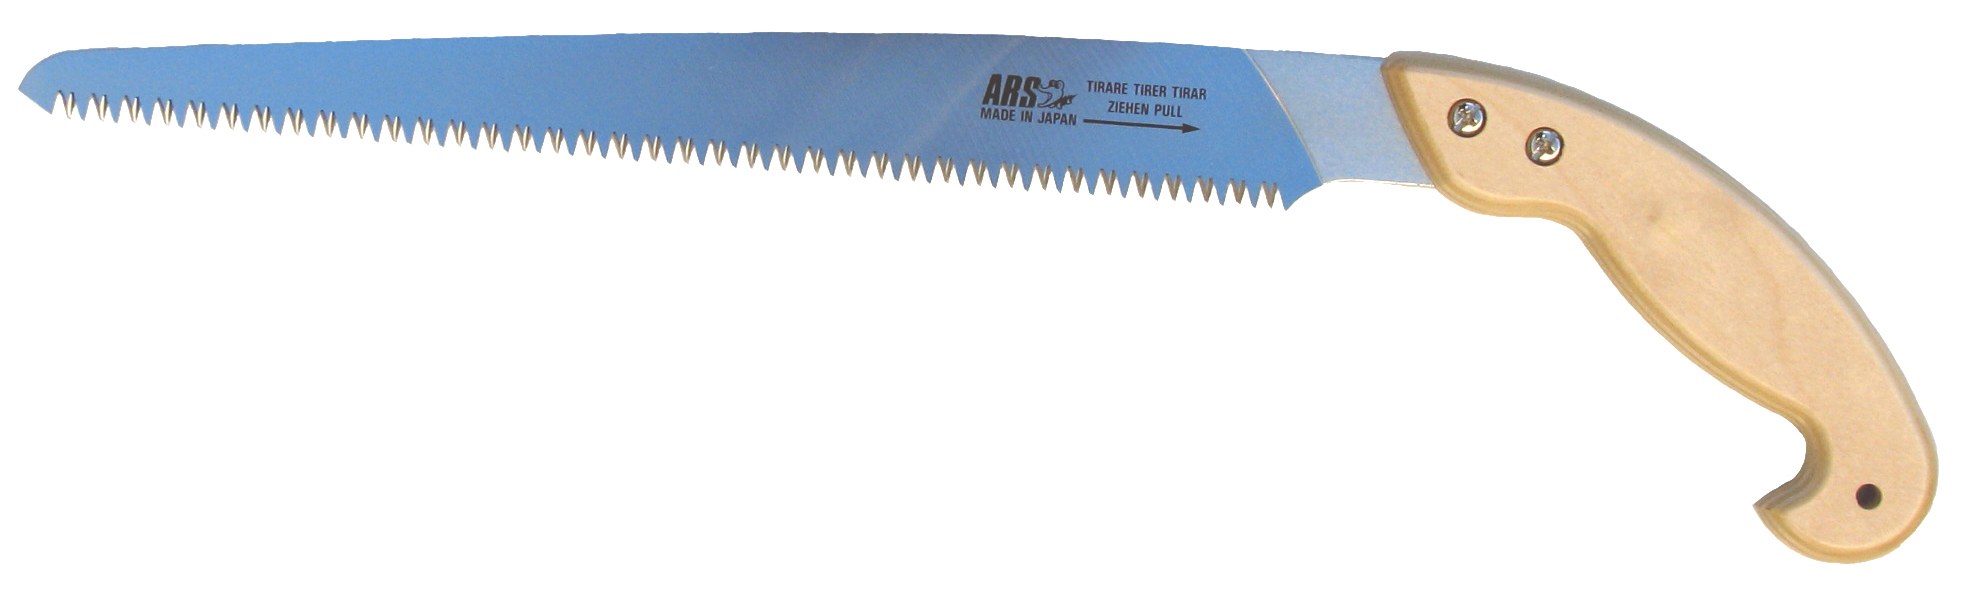 ARS Pony Saw 13 inch straight blade with wooden handle